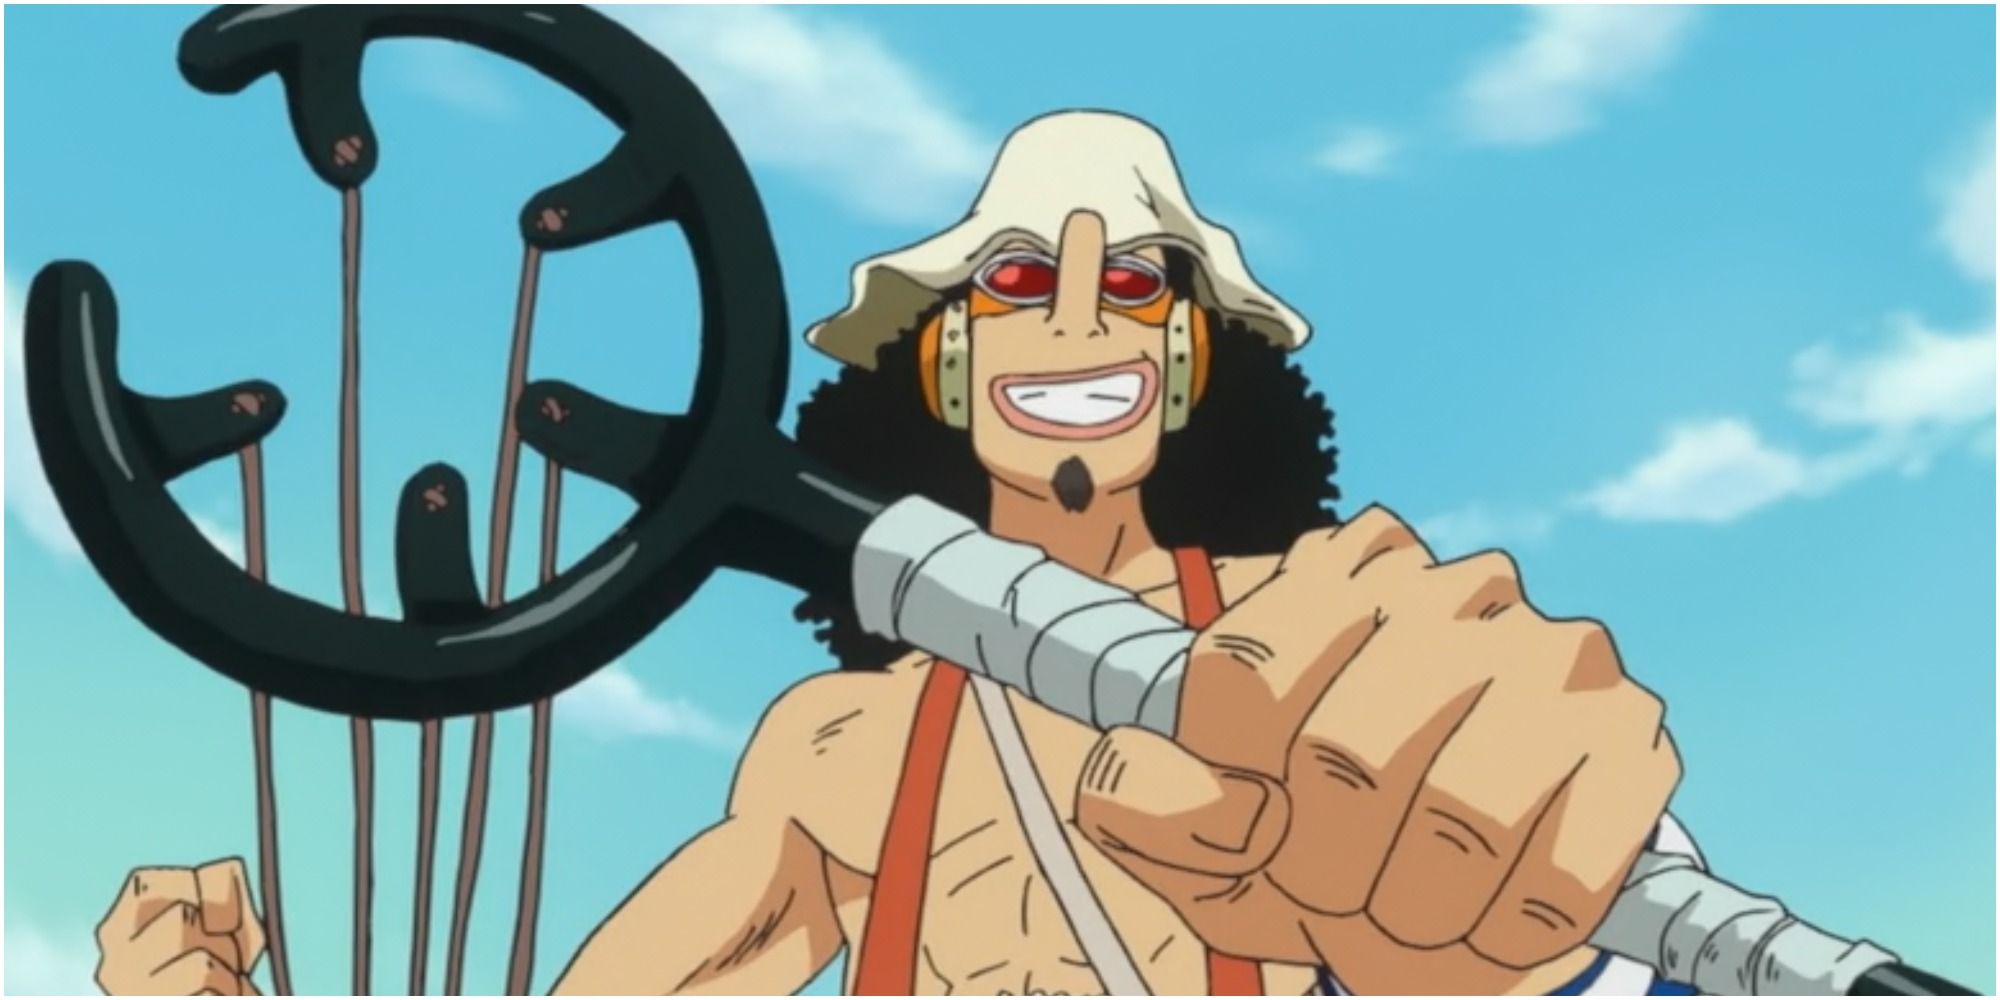 Usopp, the sniper of the Straw Hat Pirates, using his slingshot After One Piece's Time Skip